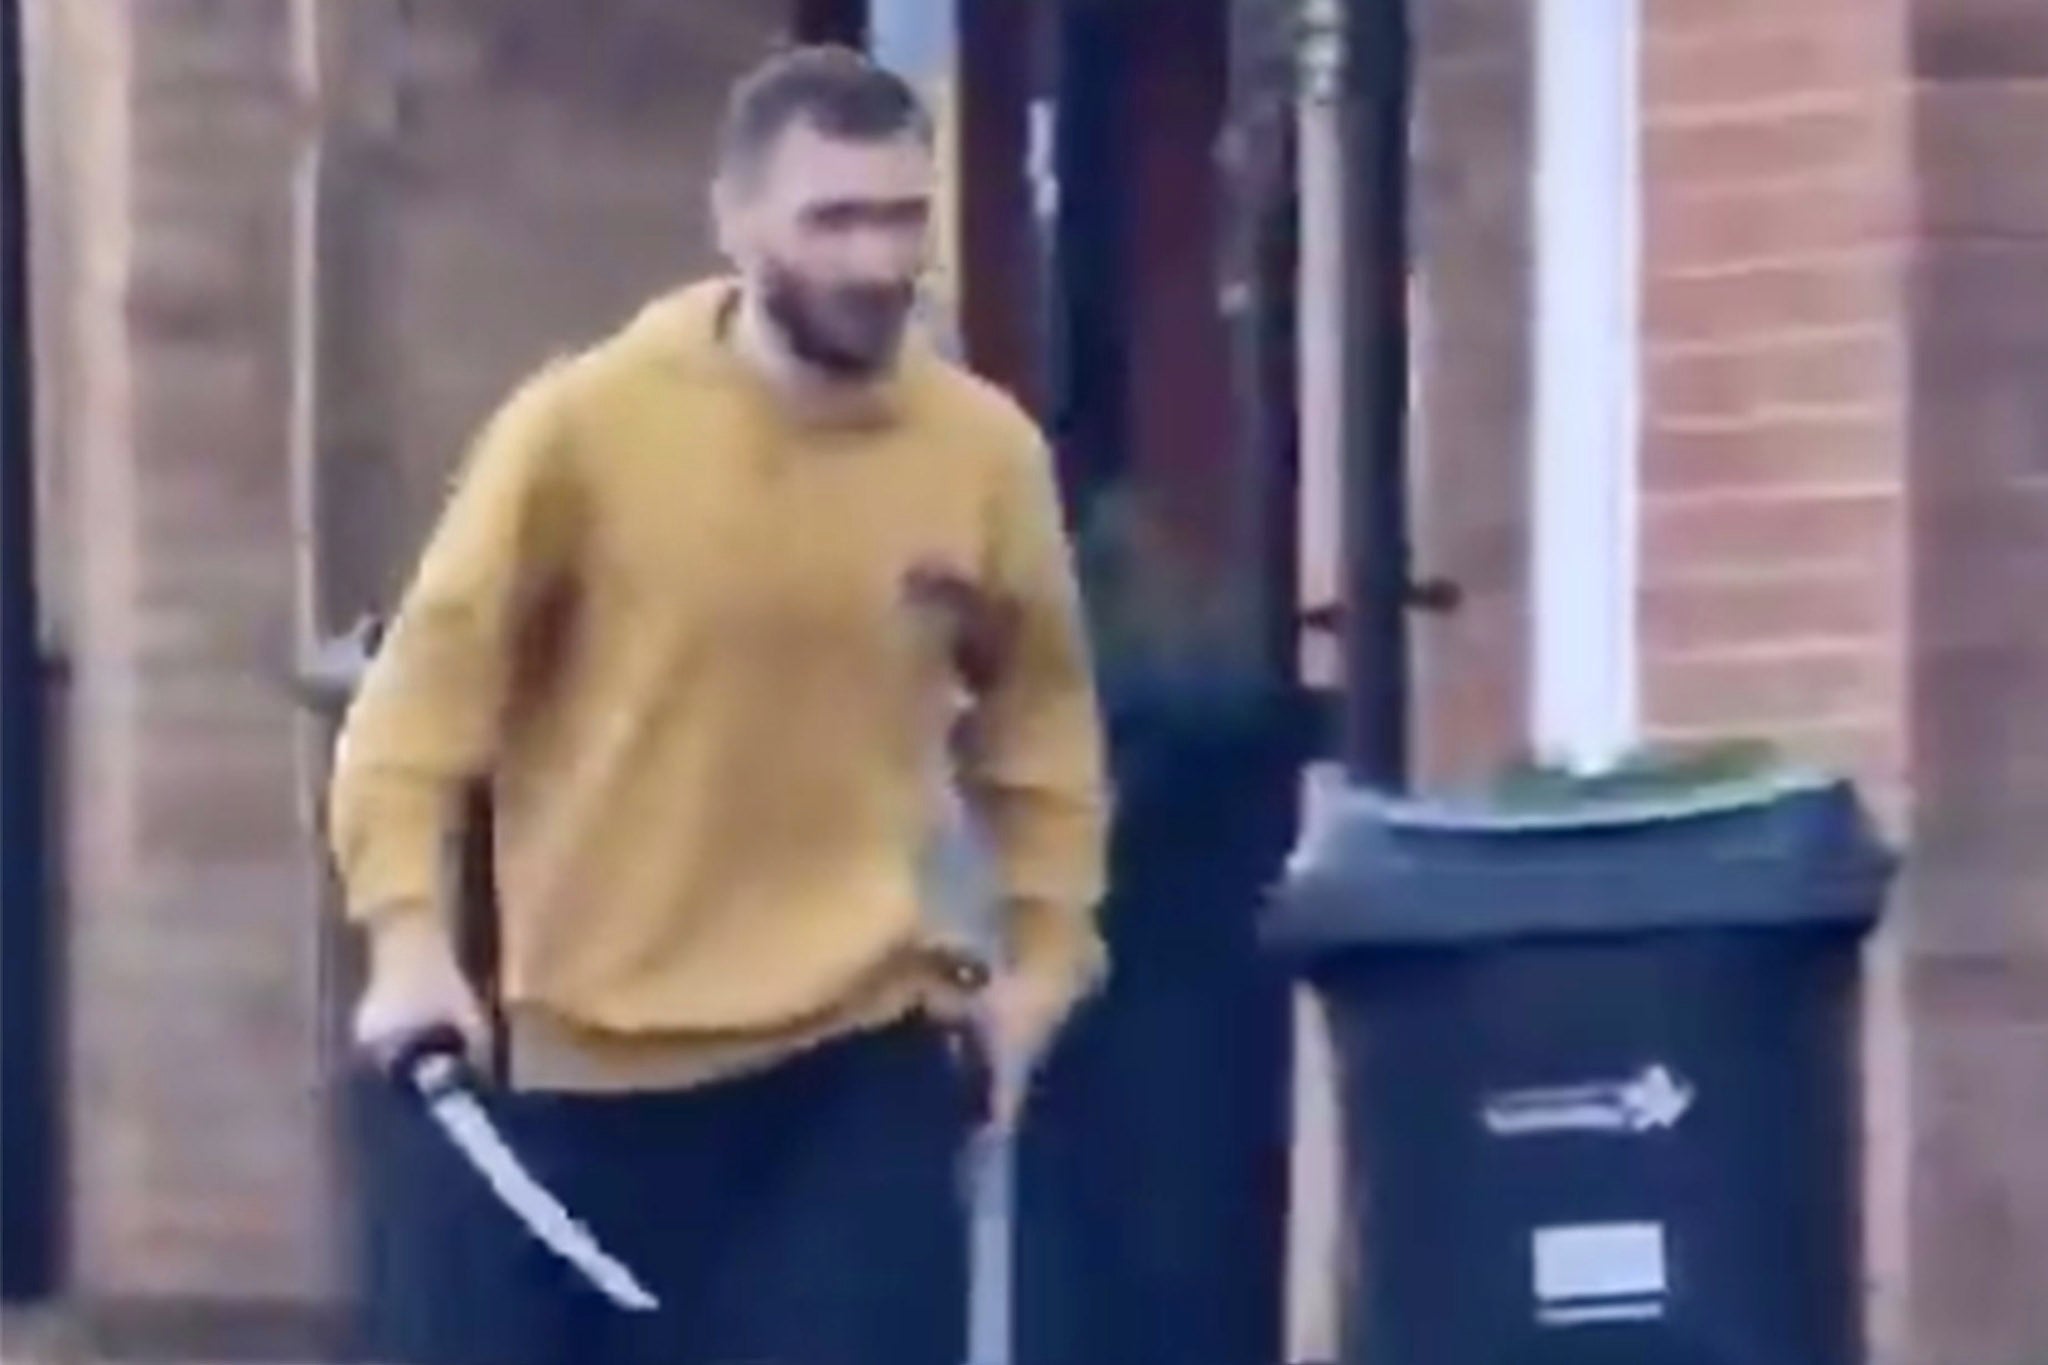 A man was spotted with what witnesses described as a samurai sword